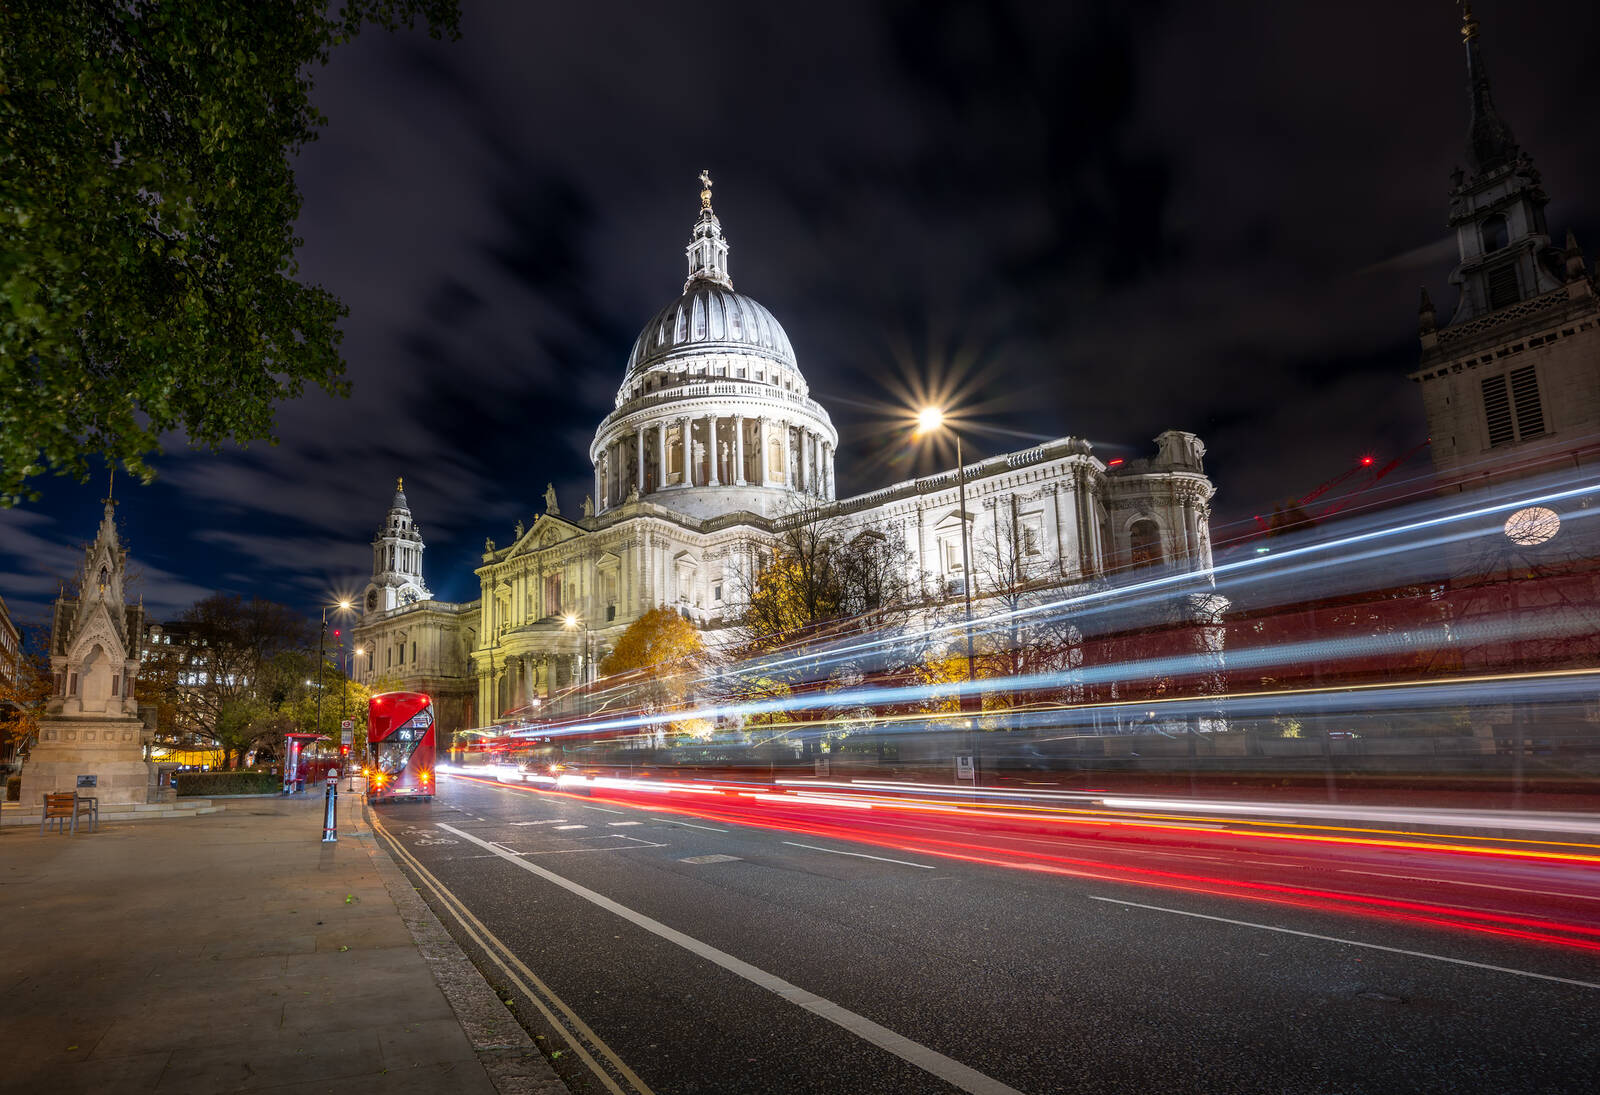 Image of Carter Lane Gardens - St Pauls Cathedral Viewpoint by Michael Ryan